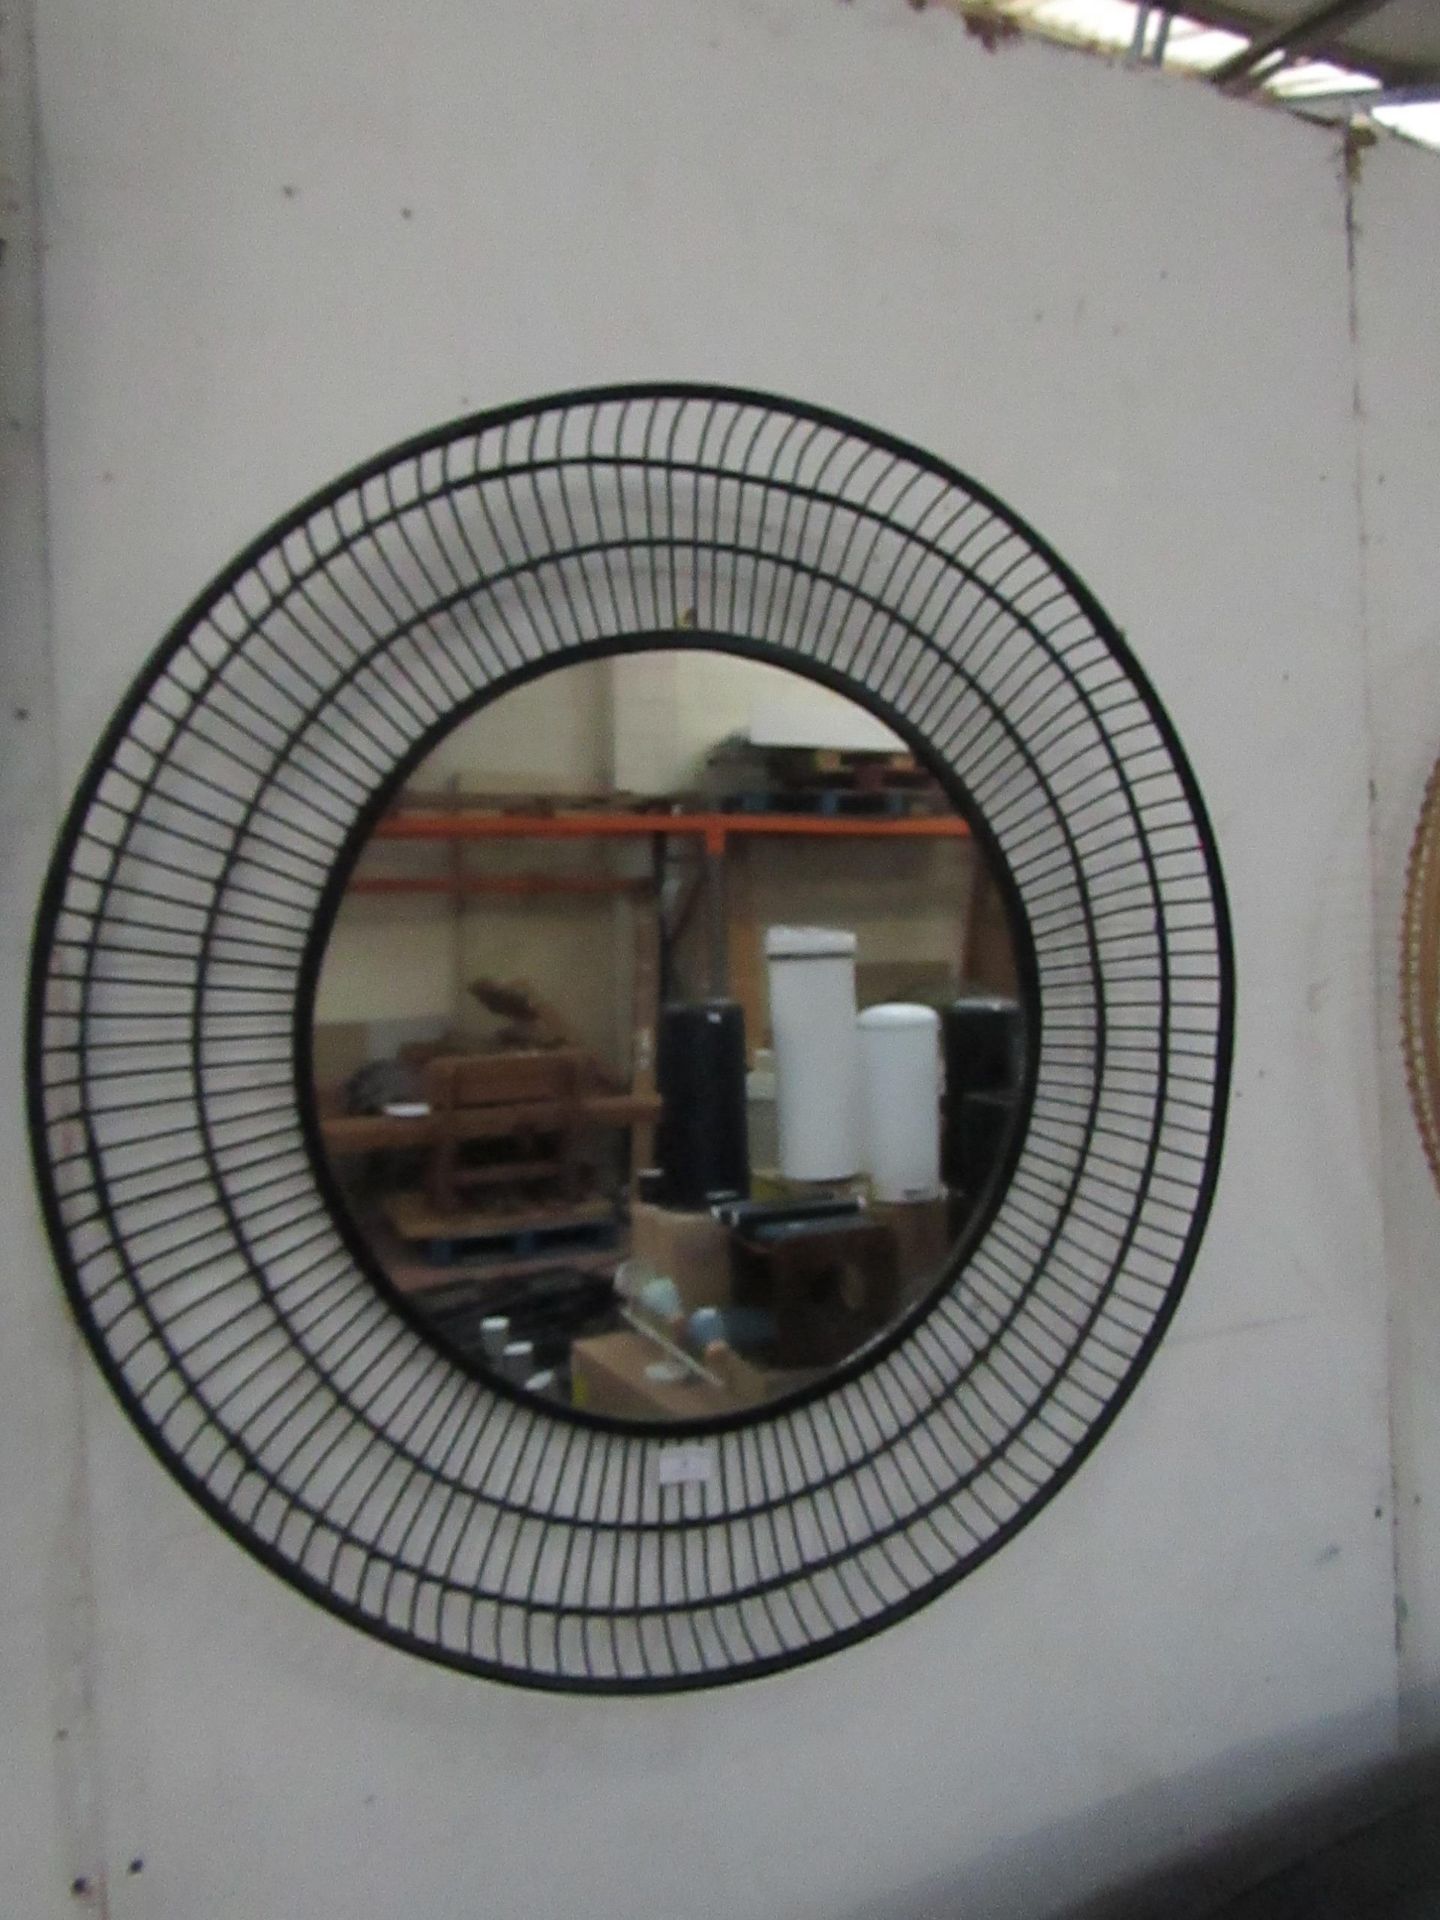 | 1X | MADE.COM WALL MIRROR IN BLACK 80CM DIAMETER | NO BOX, MAY HAVE SLIGHT MARKS |